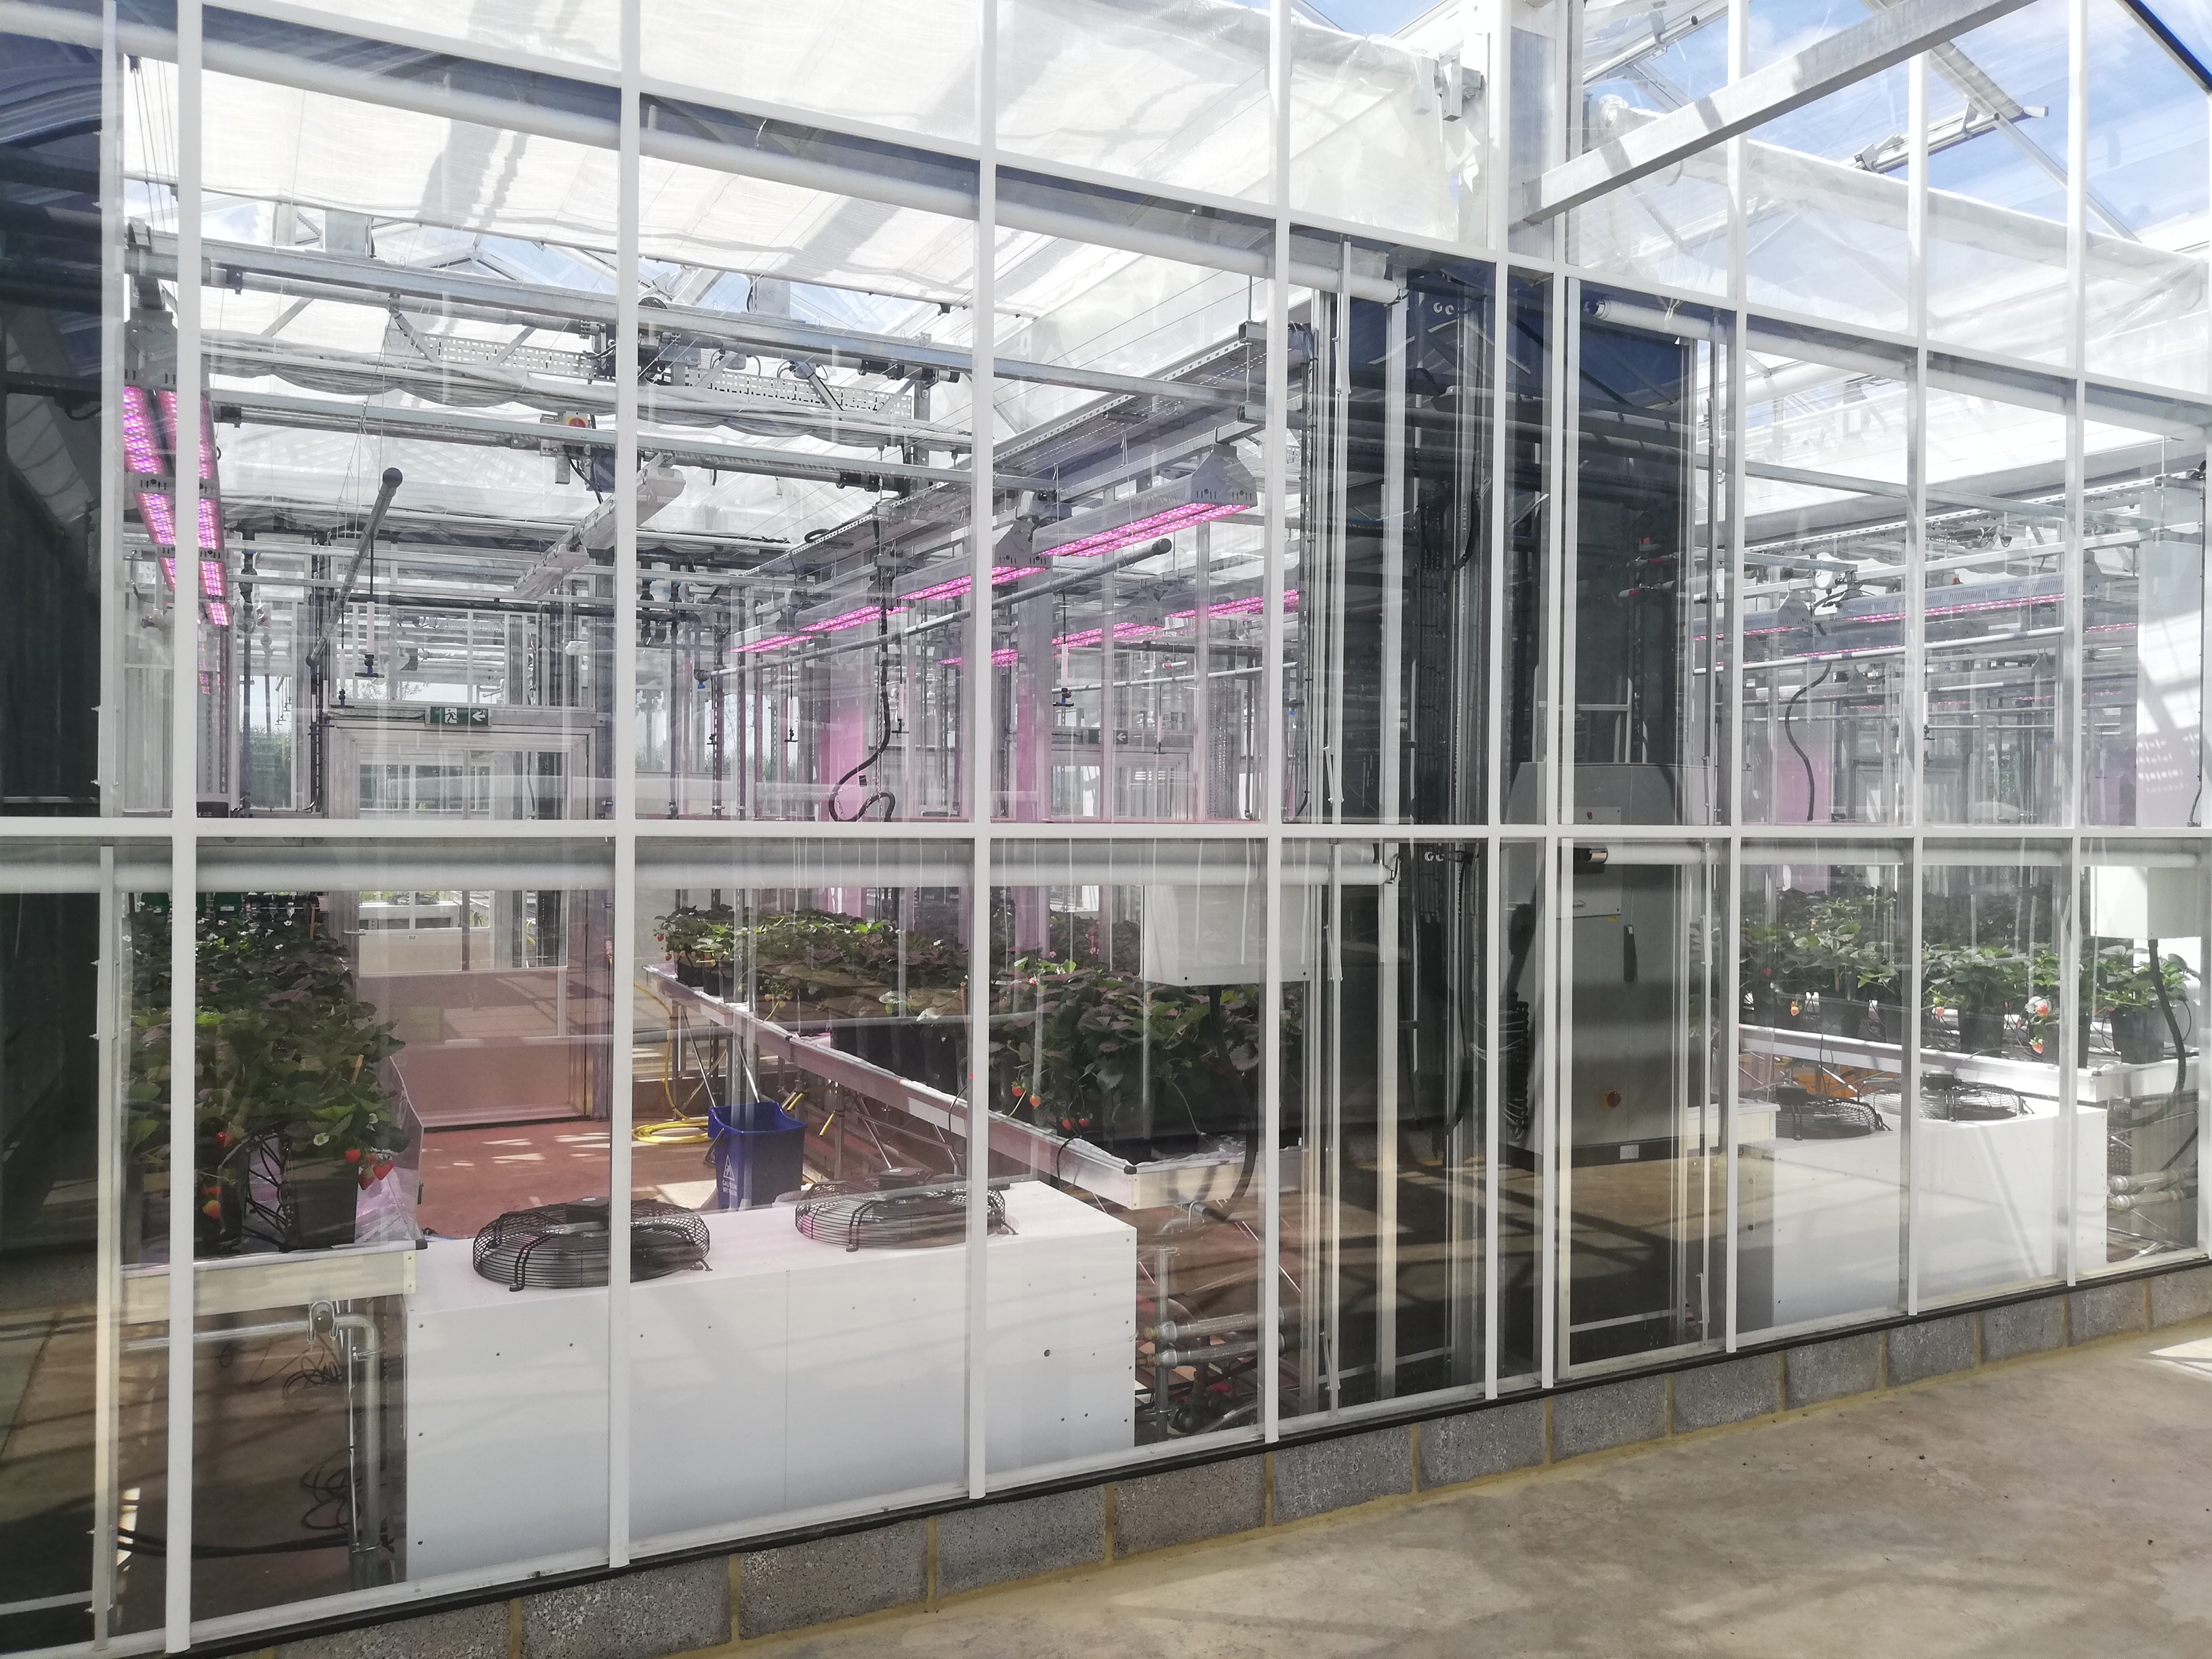 GreenTech Hub to innovate sustainable horticulture and viticulture research